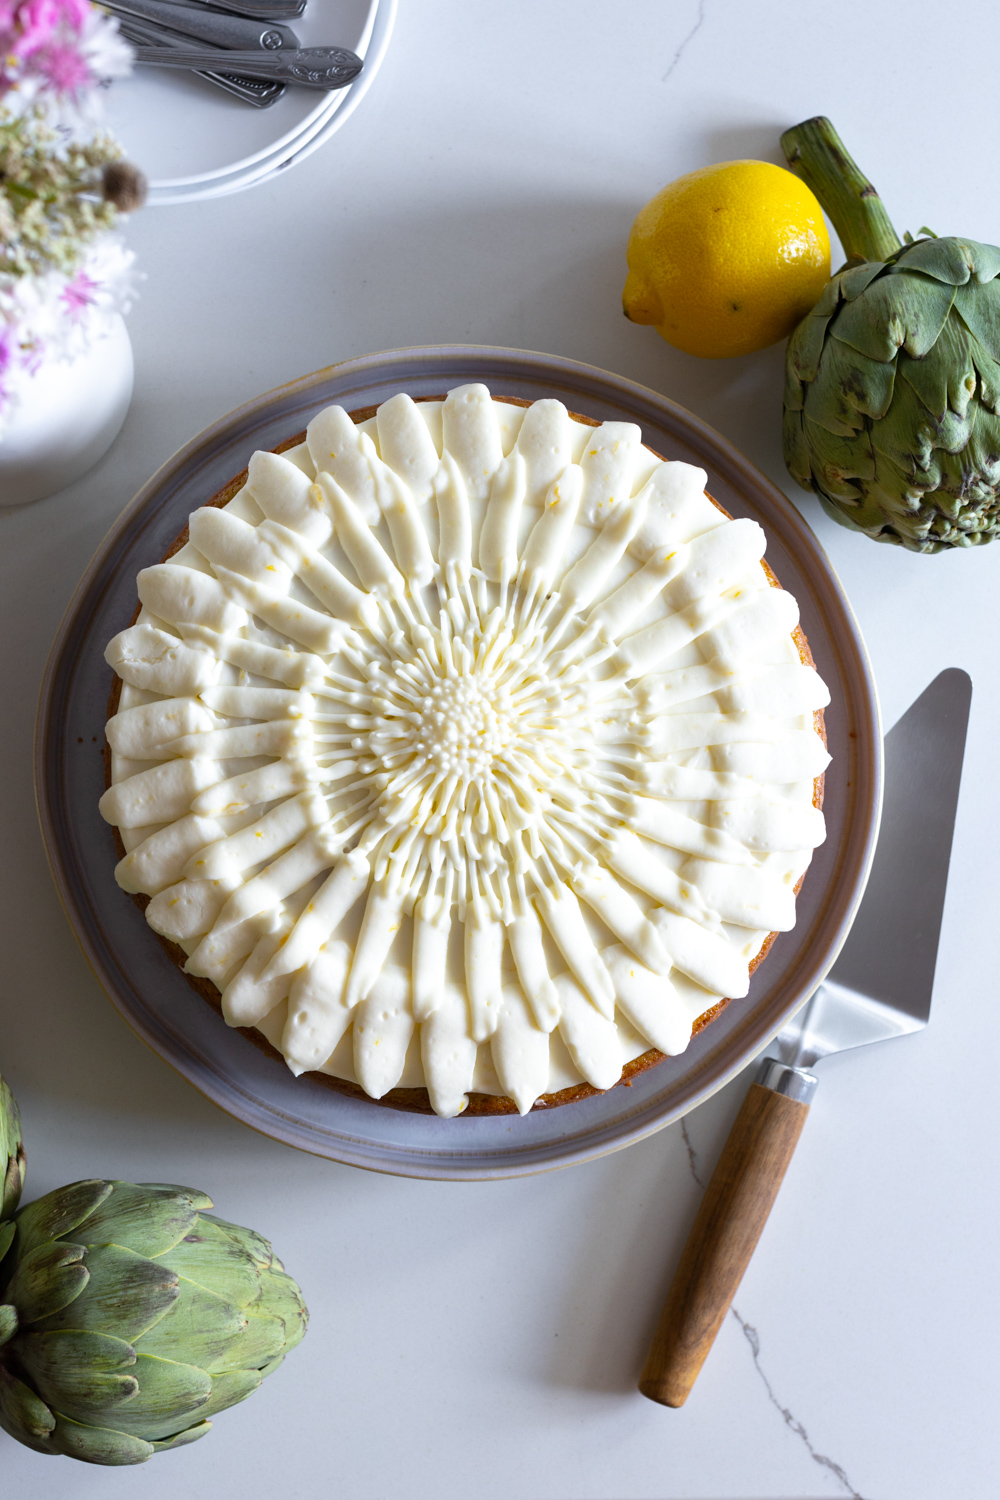 Artichoke Olive Oil Cake with Lemon Cream Cheese Frosting from Baking The Goods